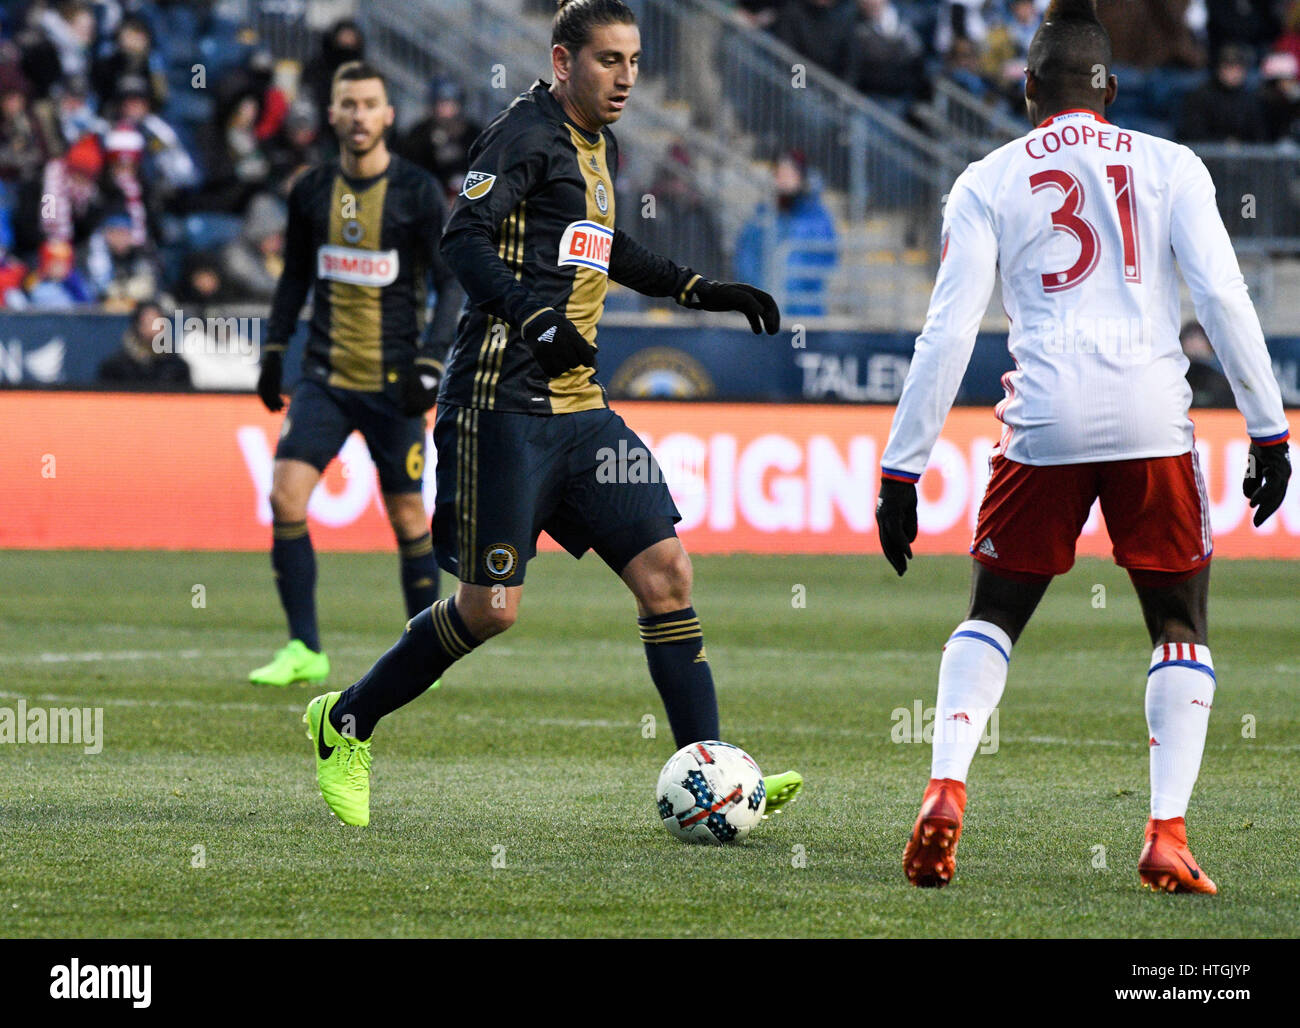 Chester, Pennsylvania, USA. 11th Mar, 2017. Toronto FC's ARMANDO COOPER, (31) fights for the ball against the Union's ALEJANDO BEDOYA, (11), during the match held at Talen Energy Stadium in Chester Pa Credit: Ricky Fitchett/ZUMA Wire/Alamy Live News Stock Photo